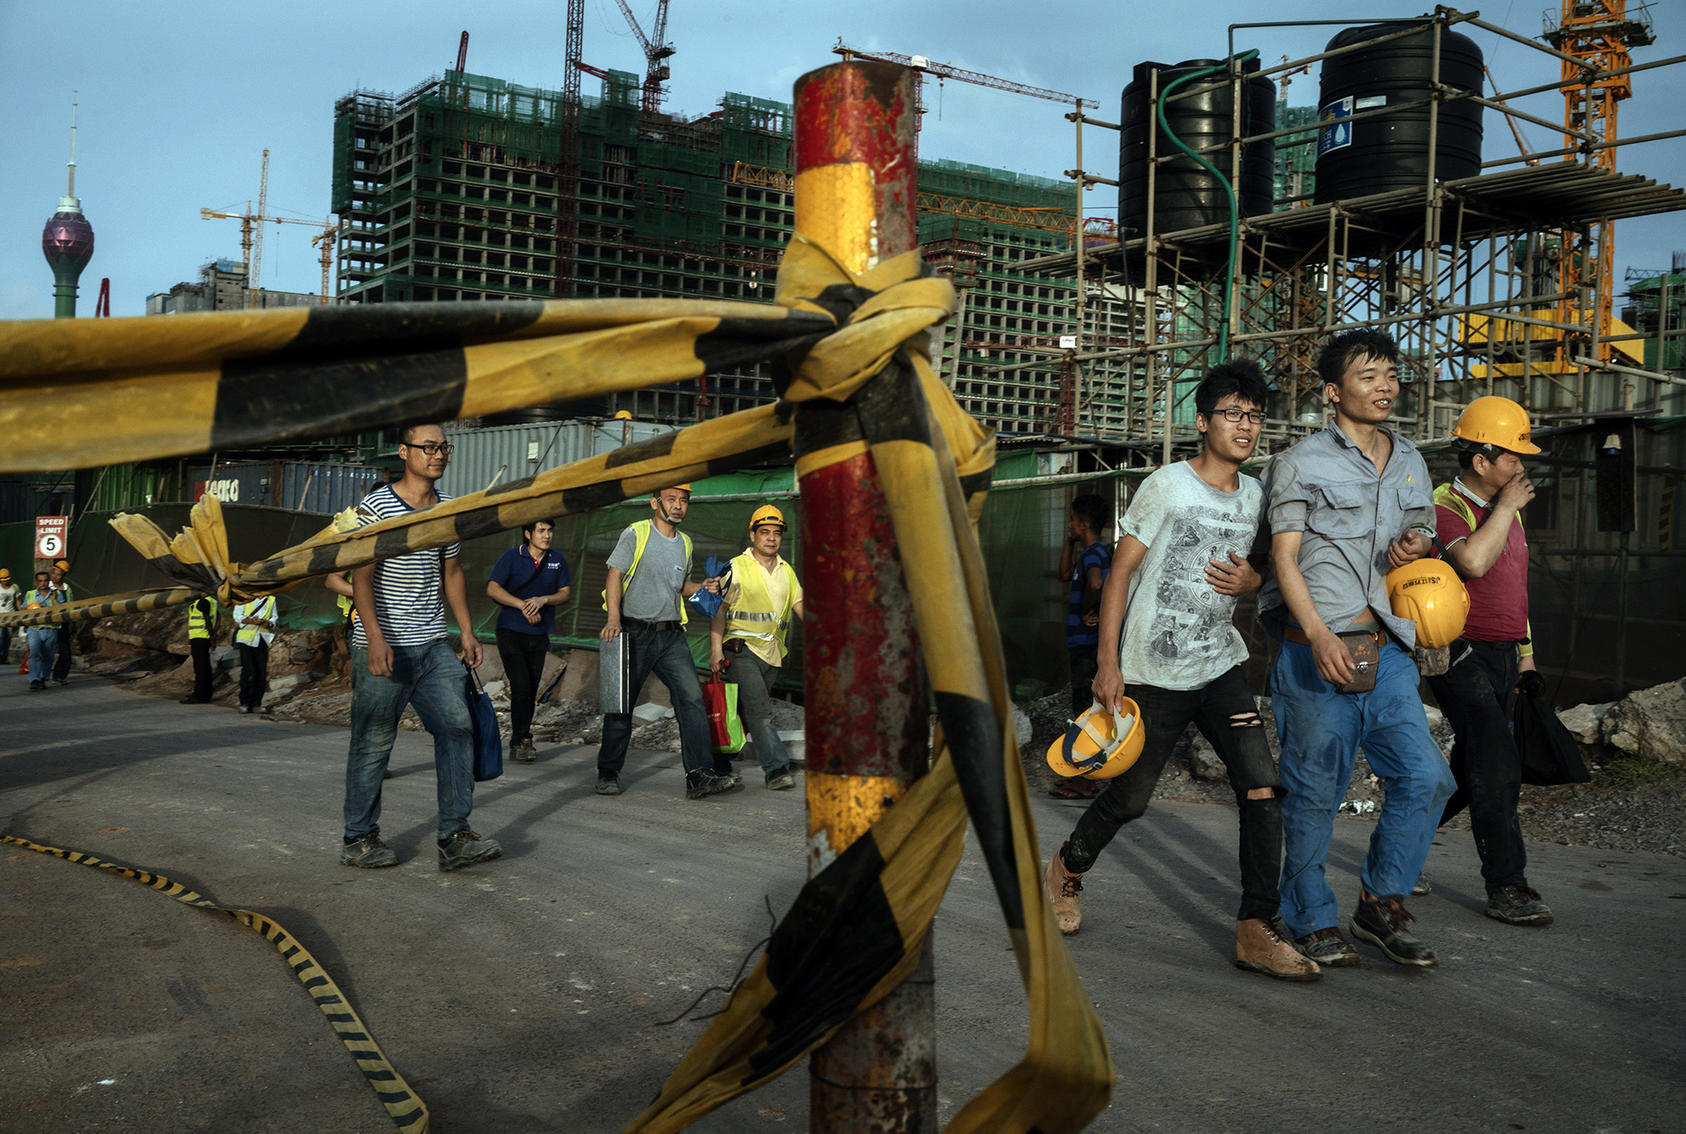 Chinese construction workers walk together after work, in Colombo, Sri Lanka, June 3, 2018. (Adam Dean/The New York Times)